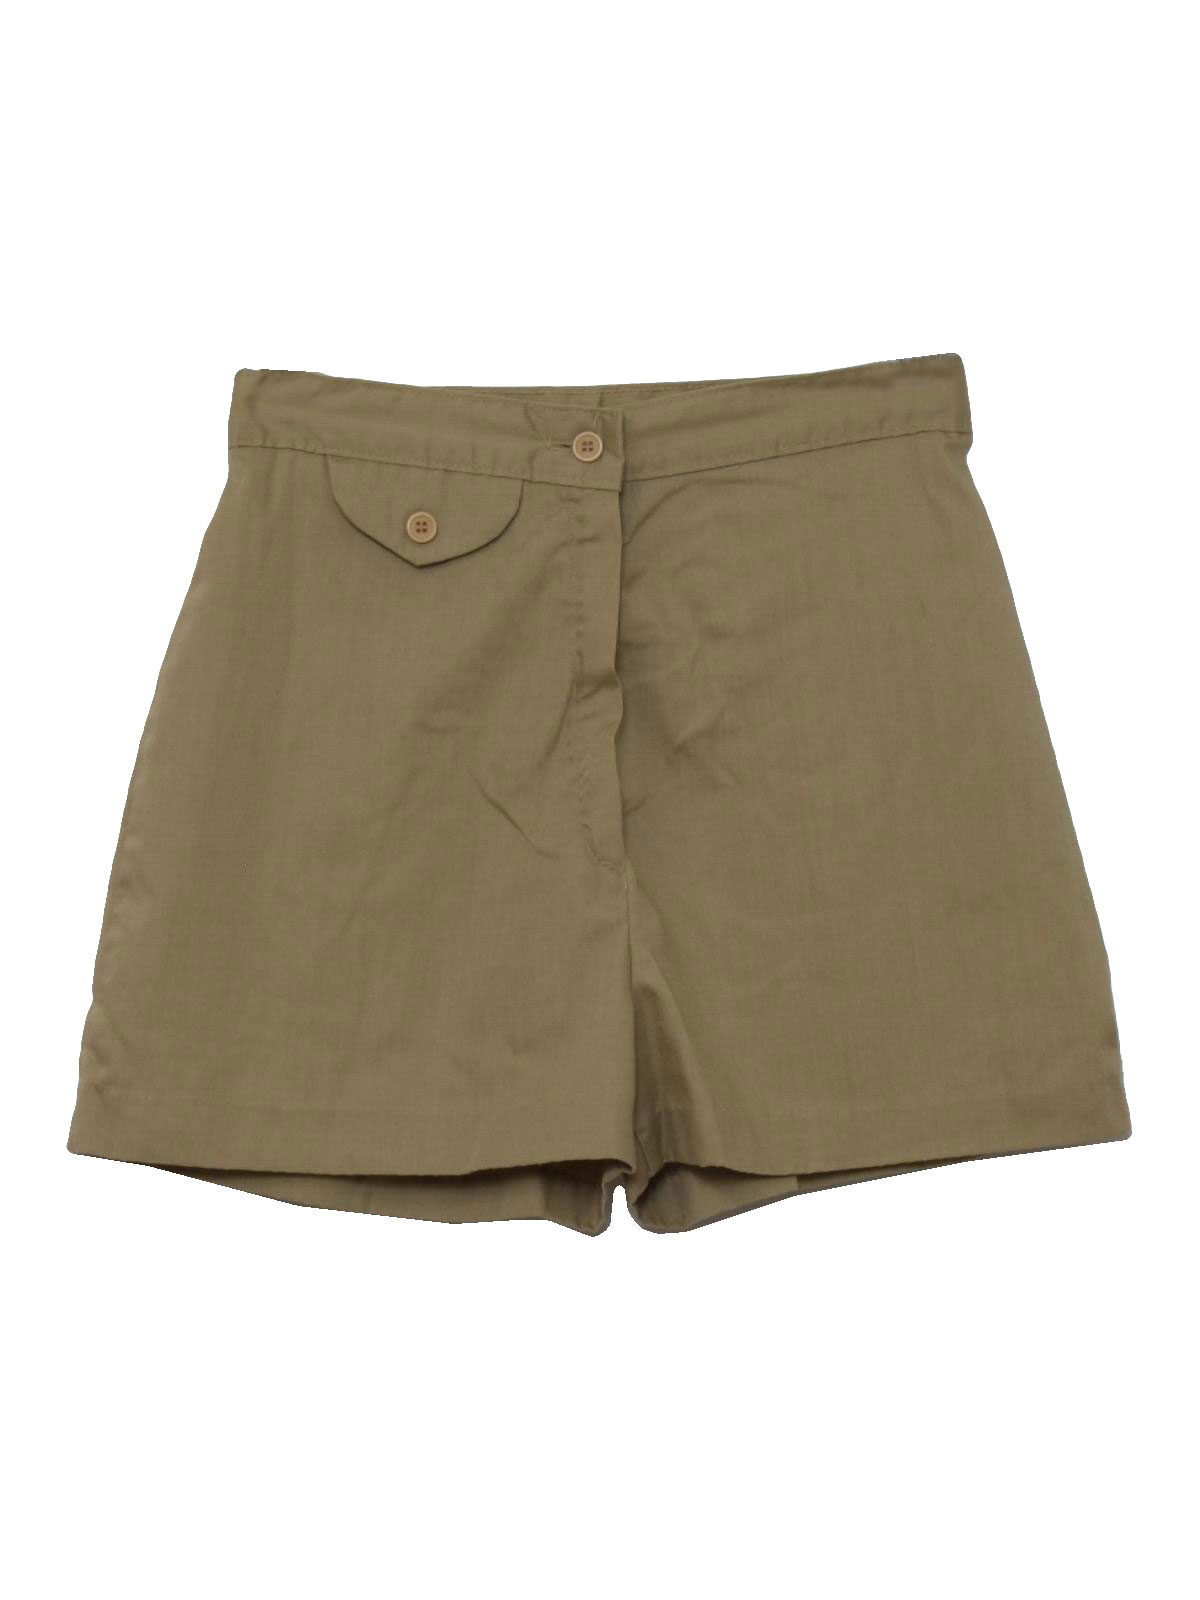 Retro 70's Shorts: 70s -Care Label- Womens khaki tan polyester and ...